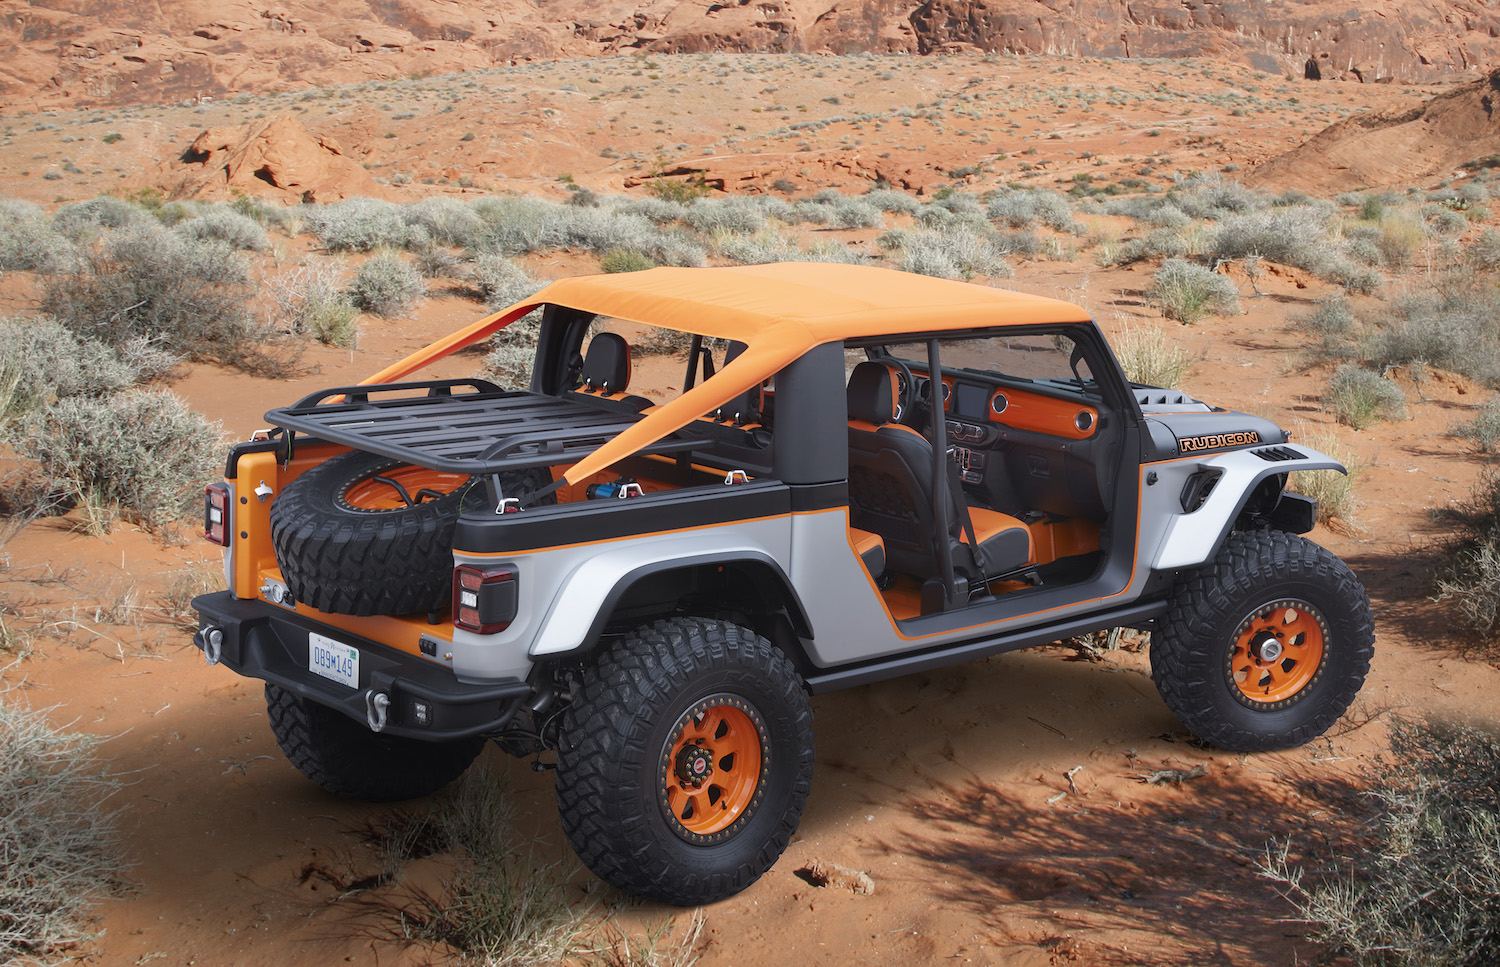 Shortened Jeep Gladiator concept truck with orange convertible roof.